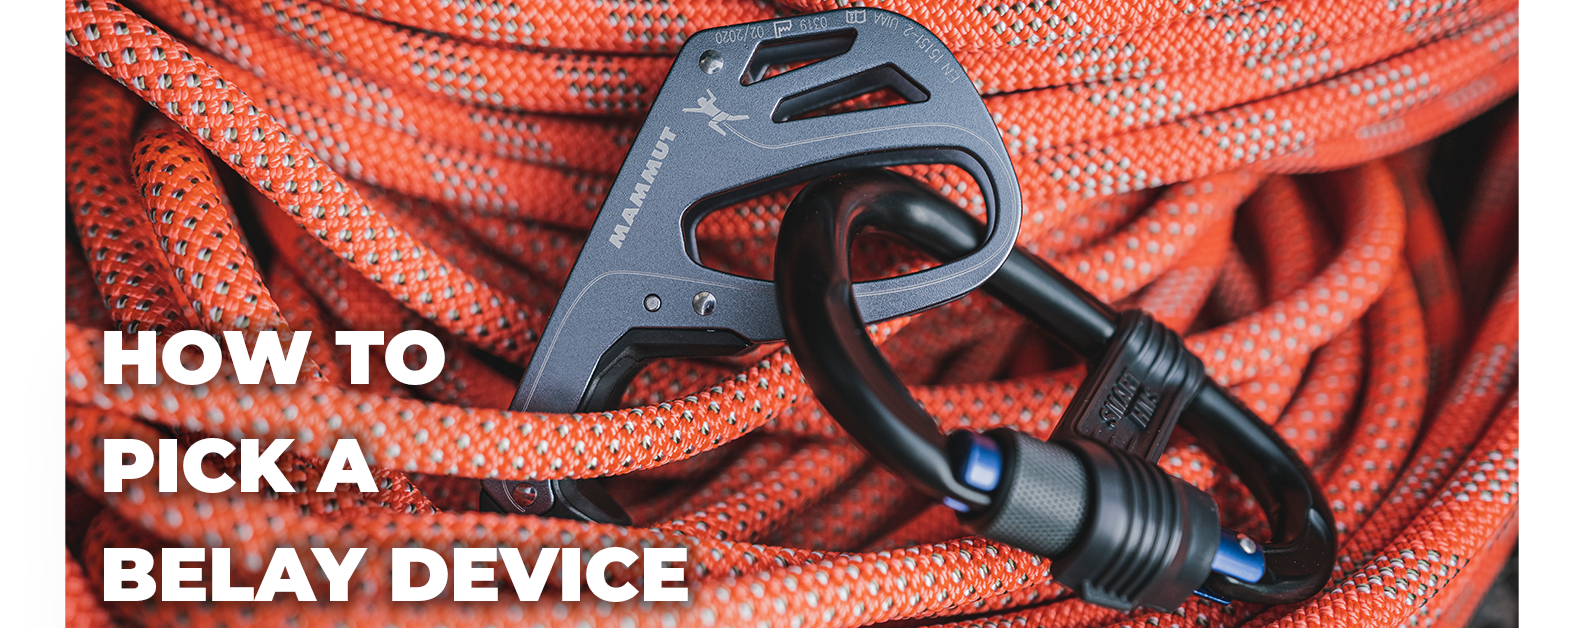 Banner image displaying Mammut belay device in coil of rope